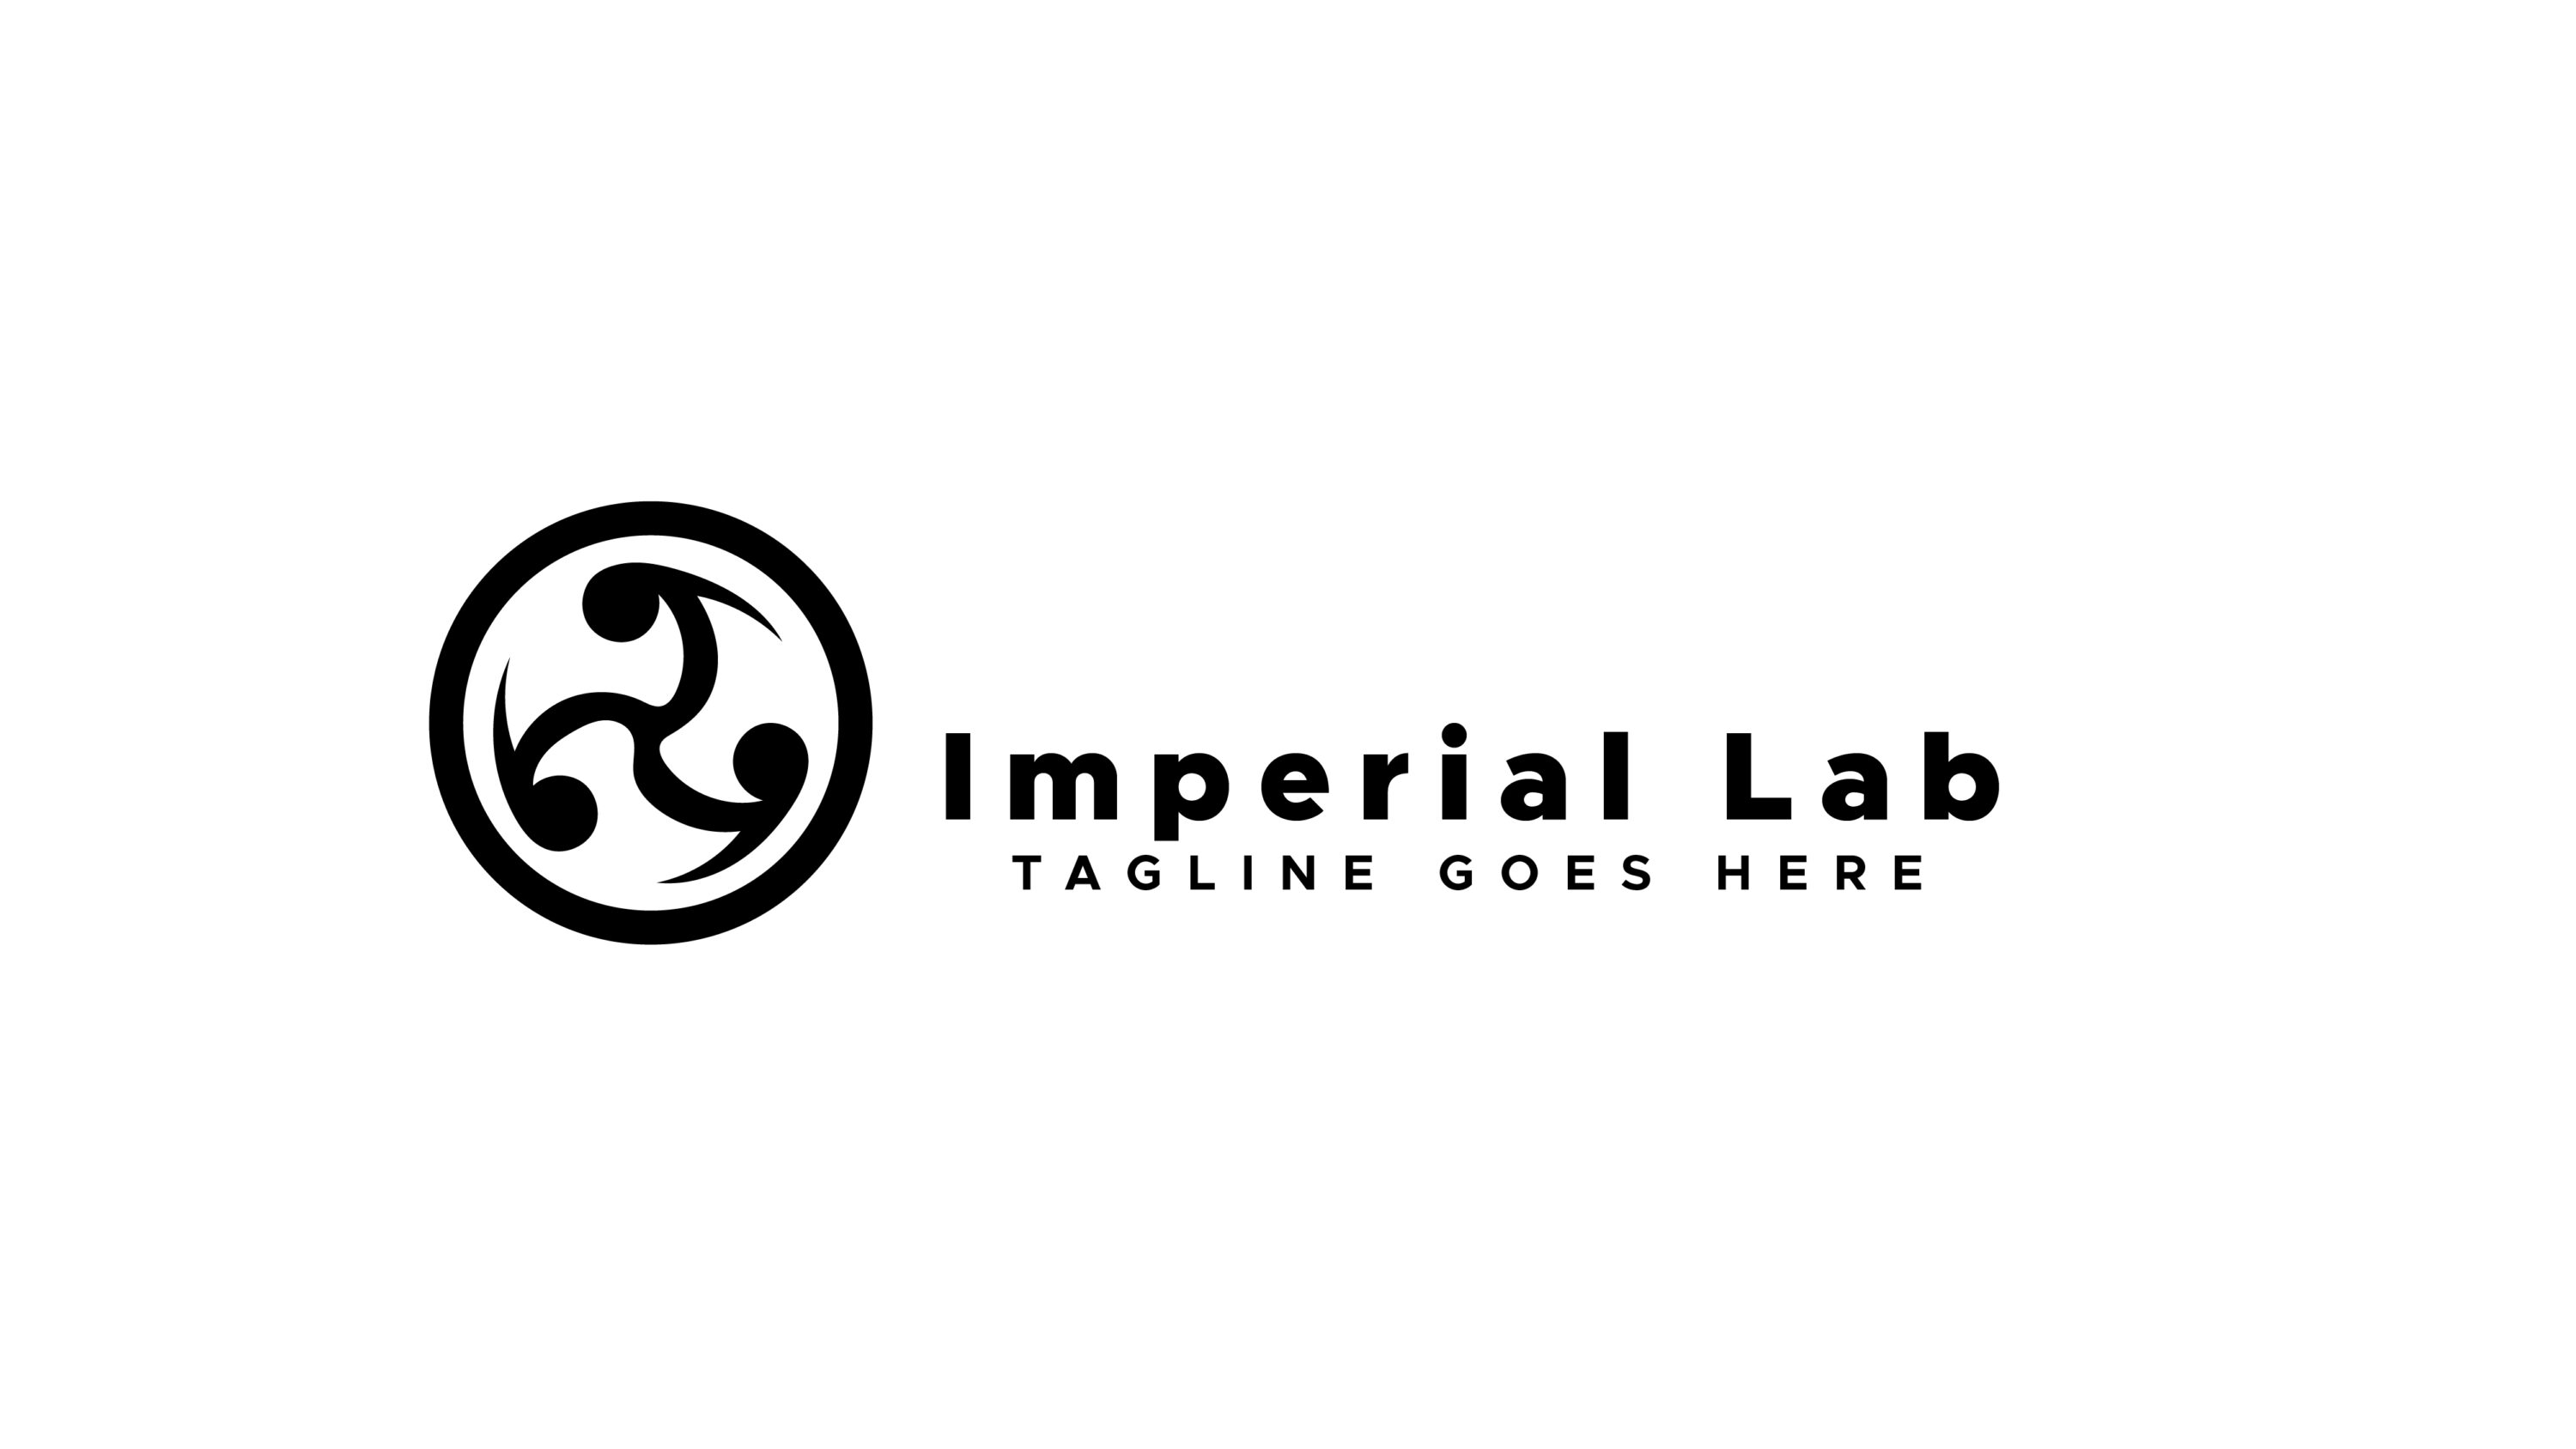 Imperial Lab Professional Logo Design Template Only 12$, black logo on white background.